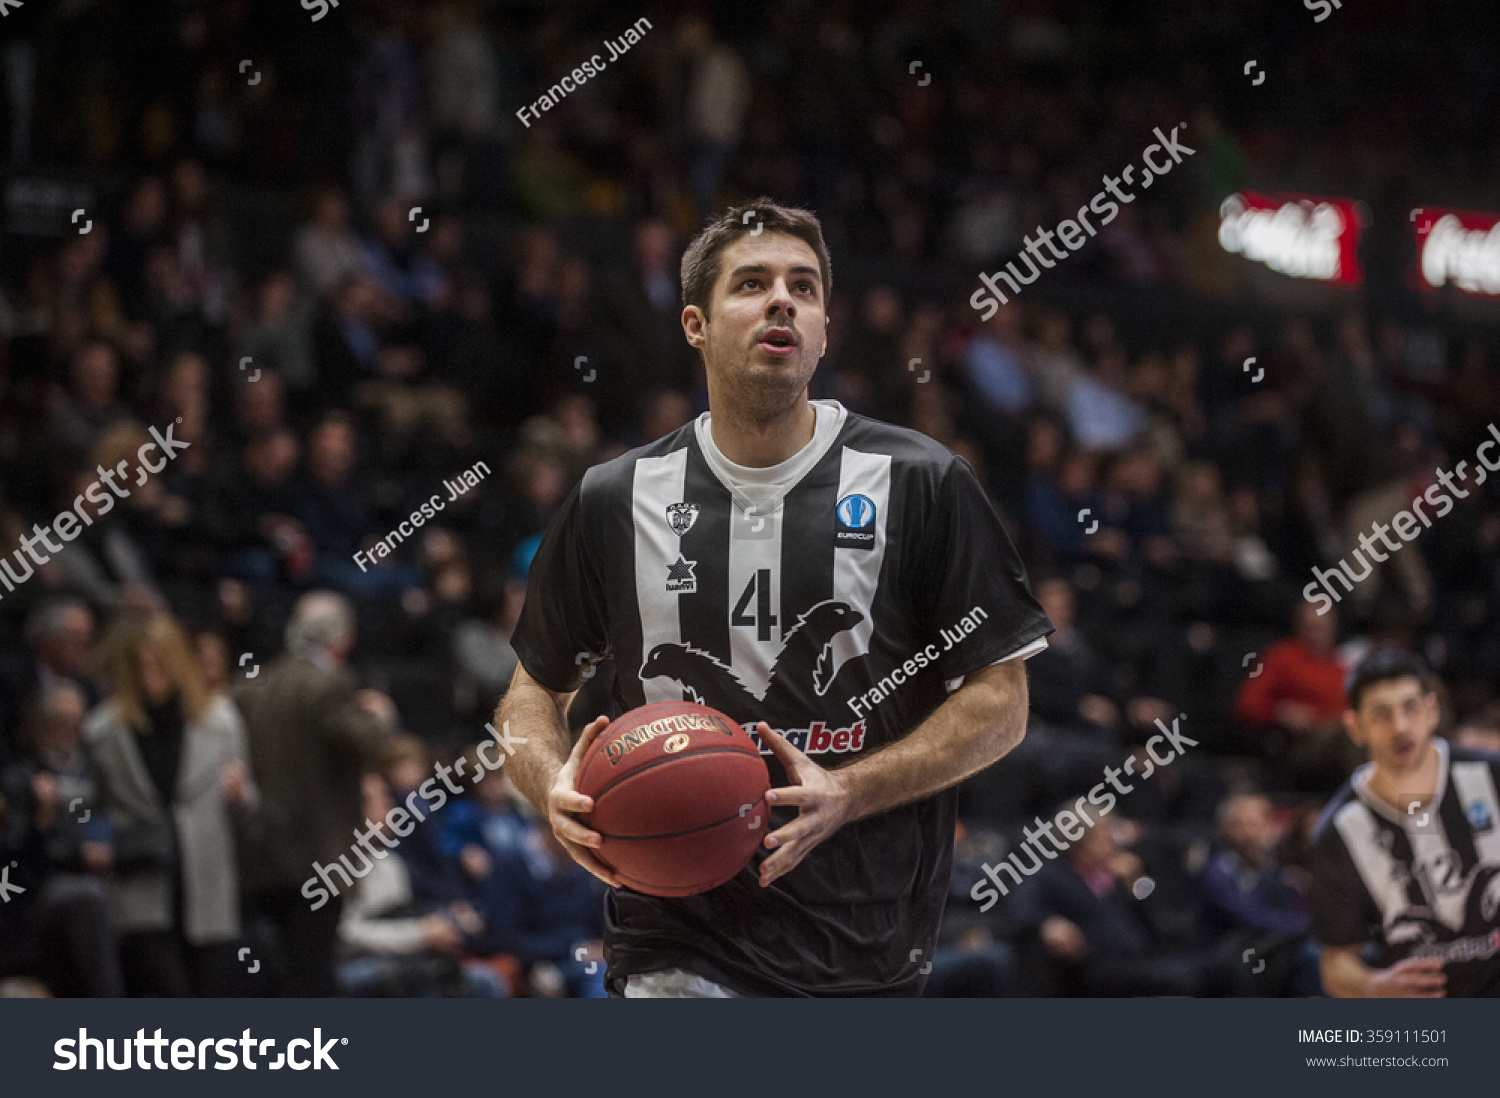 VALENCIA, SPAIN - JANUARY 6: Milenko Tepic during EUROCUP match between Valencia Basket and PAOK Thessaloniki at Fonteta Stadium on January 6, 2015 in Valencia, Spain #359111501